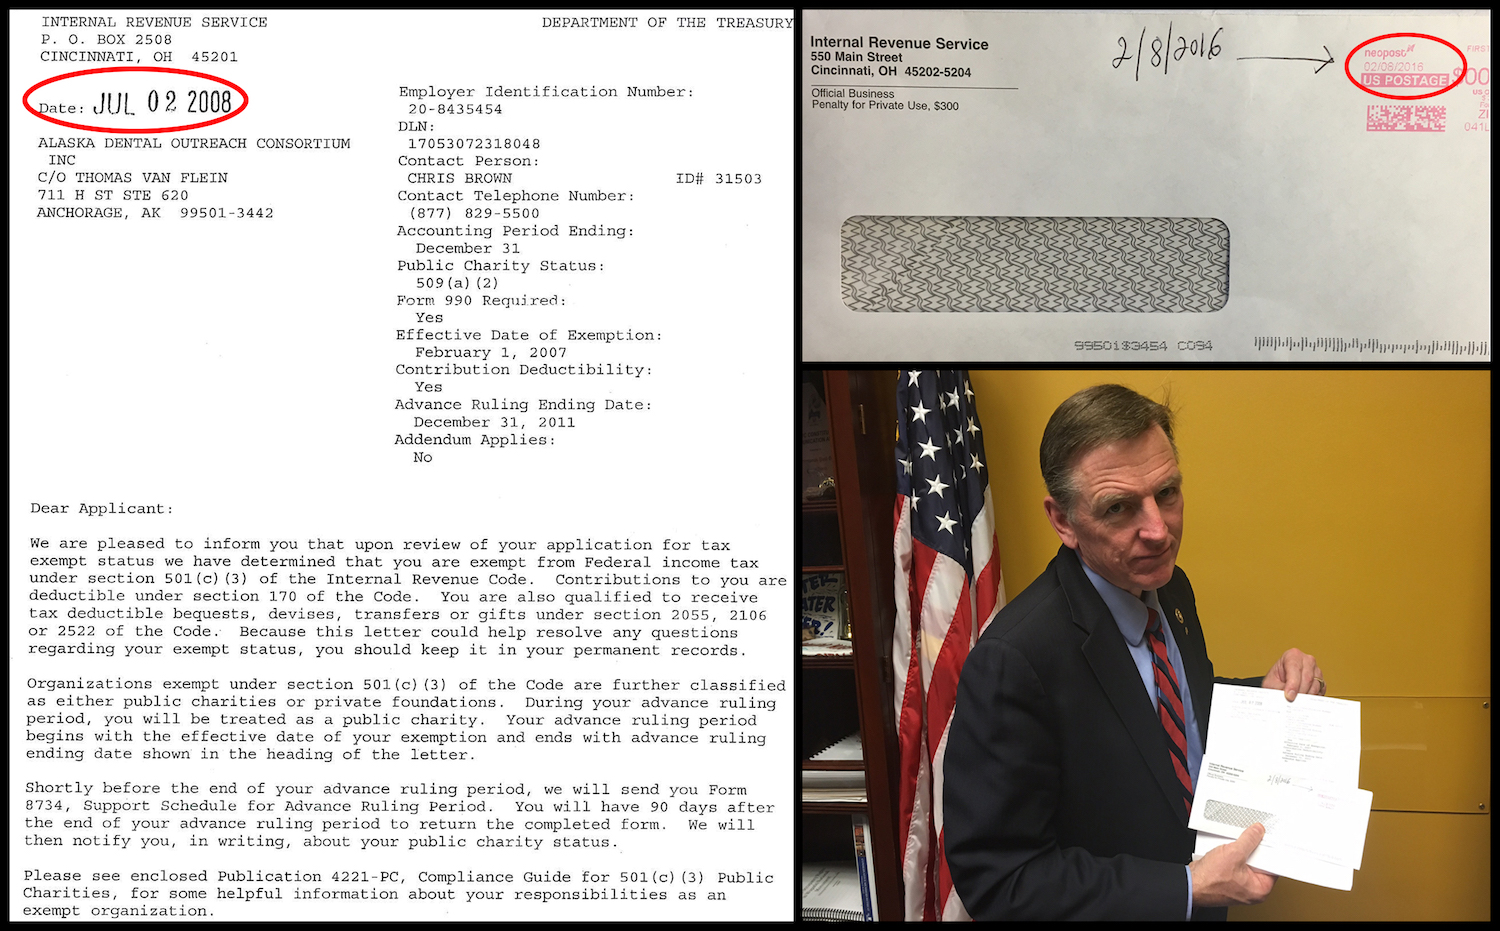 Copy of Congressman Paul Gosar's letter from the IRS